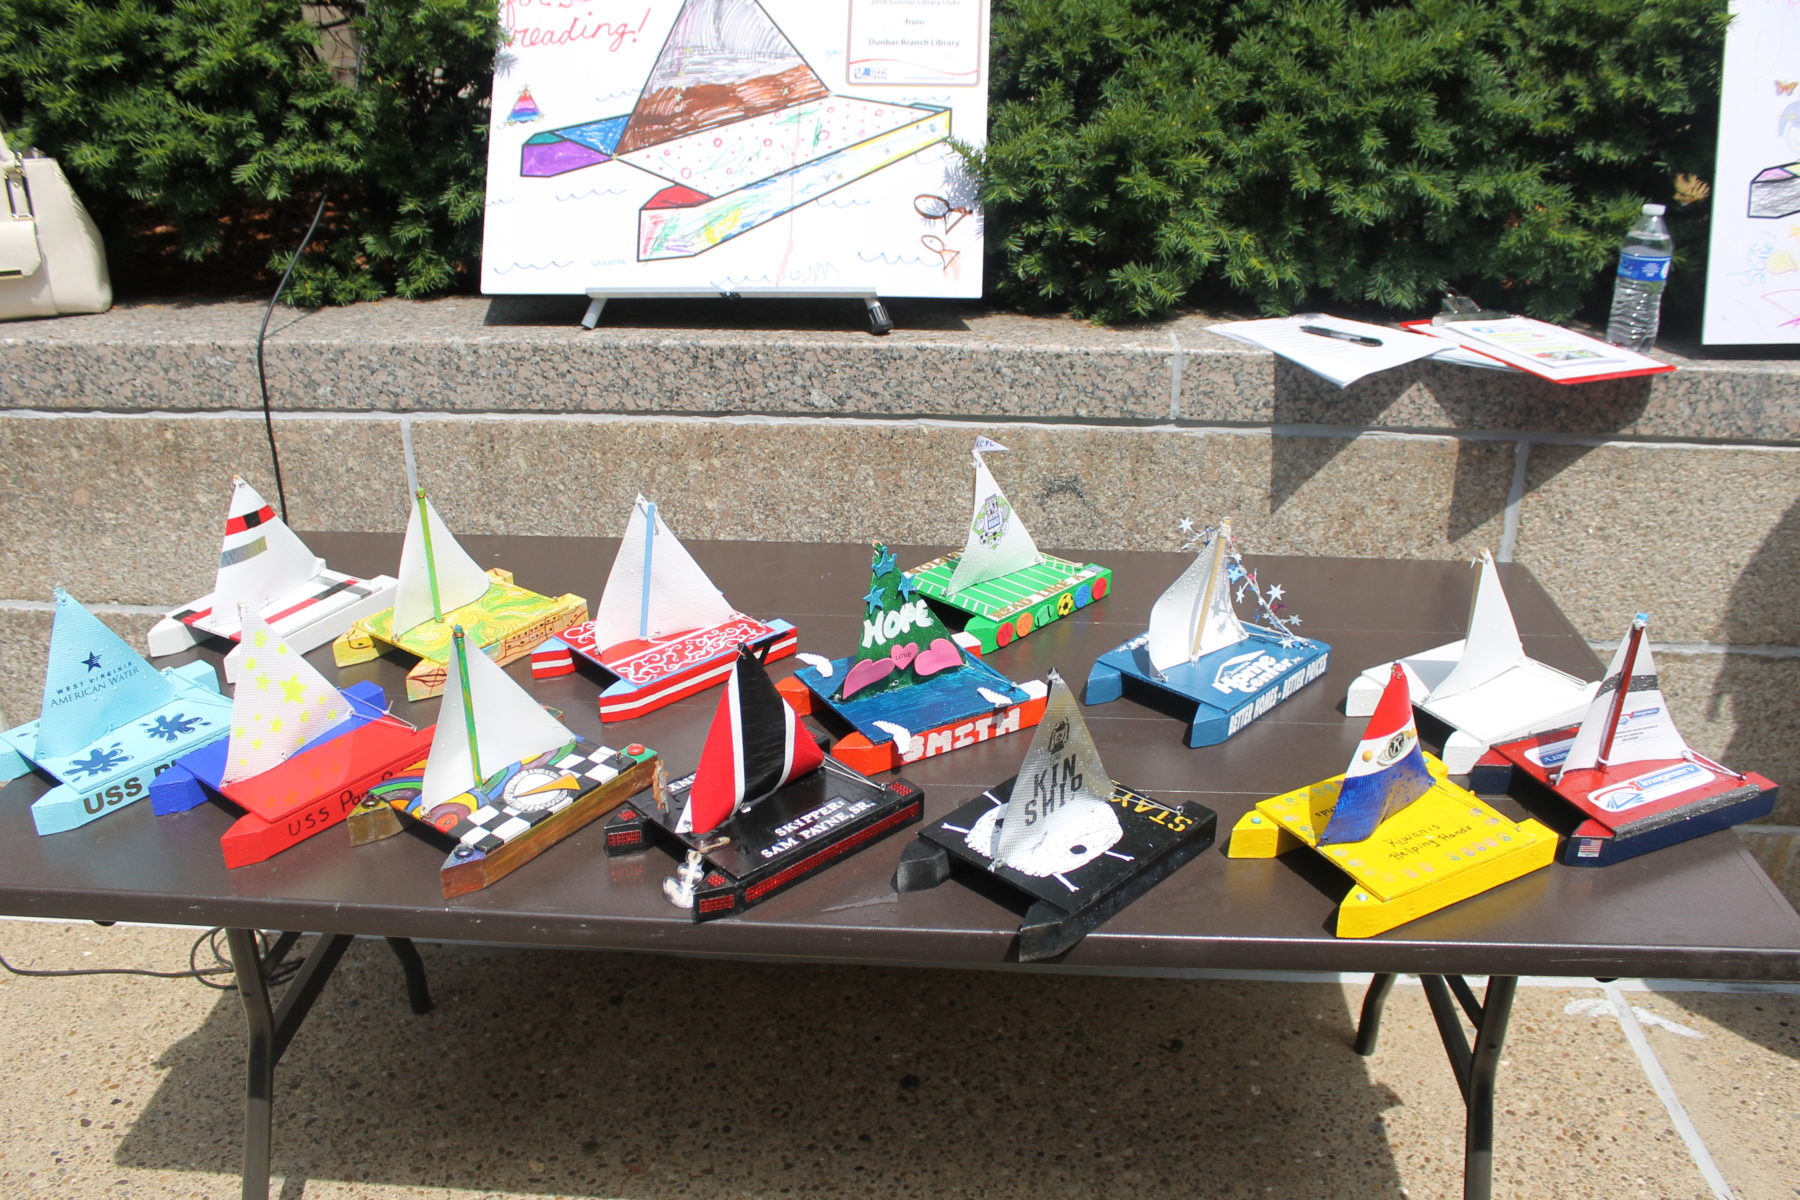 Various miniature boats sitting on a table.